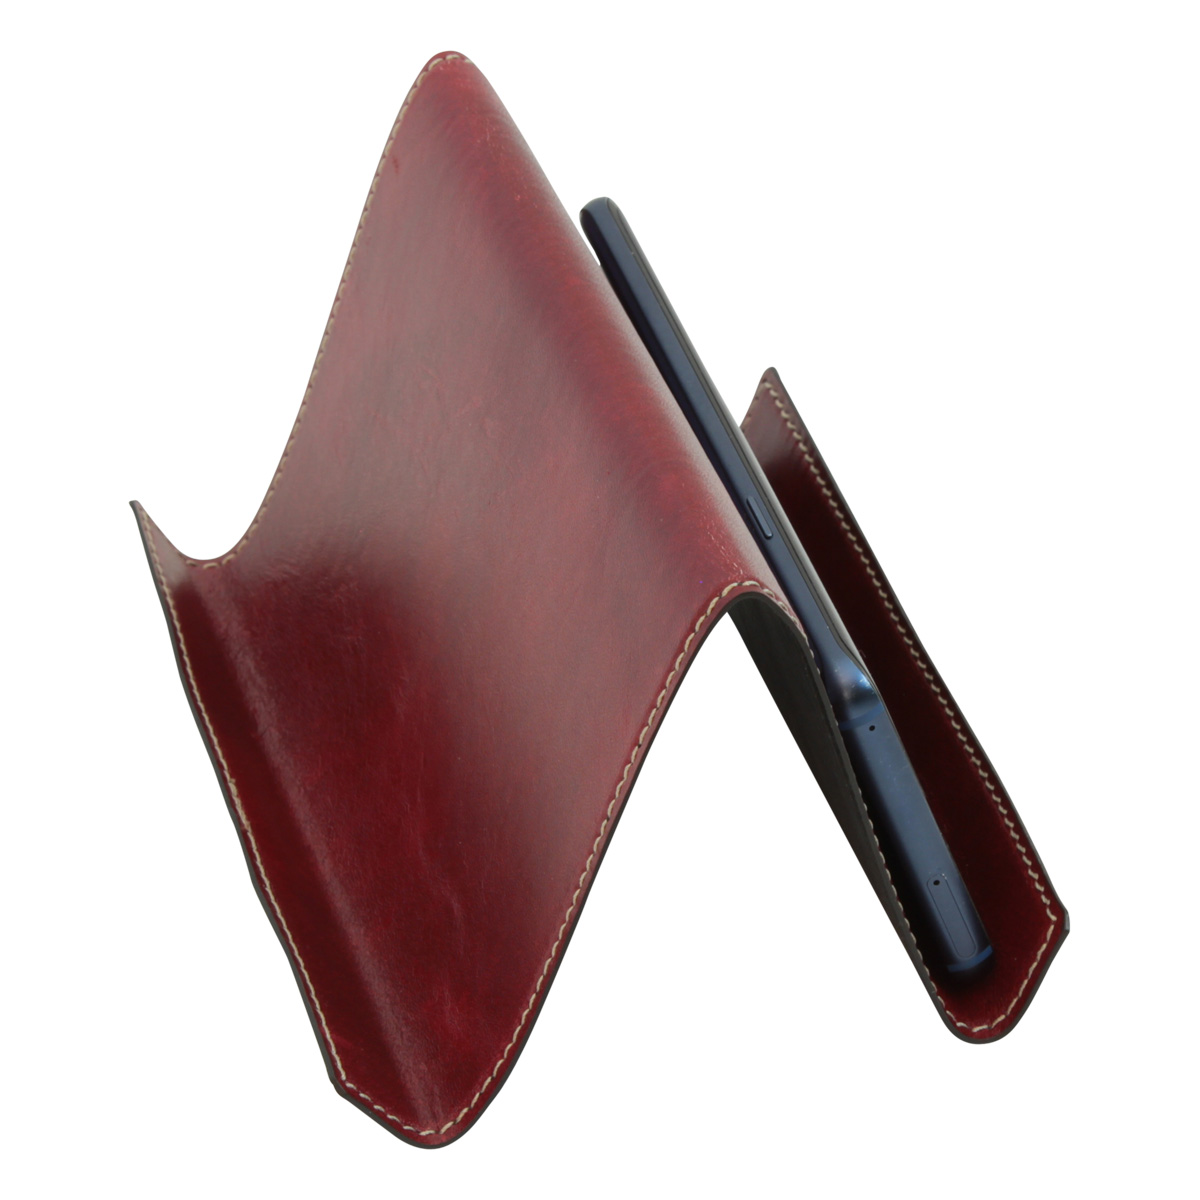 Leather ipad and iphone stand - red | 764089RO | EURO | Old Angler Firenze